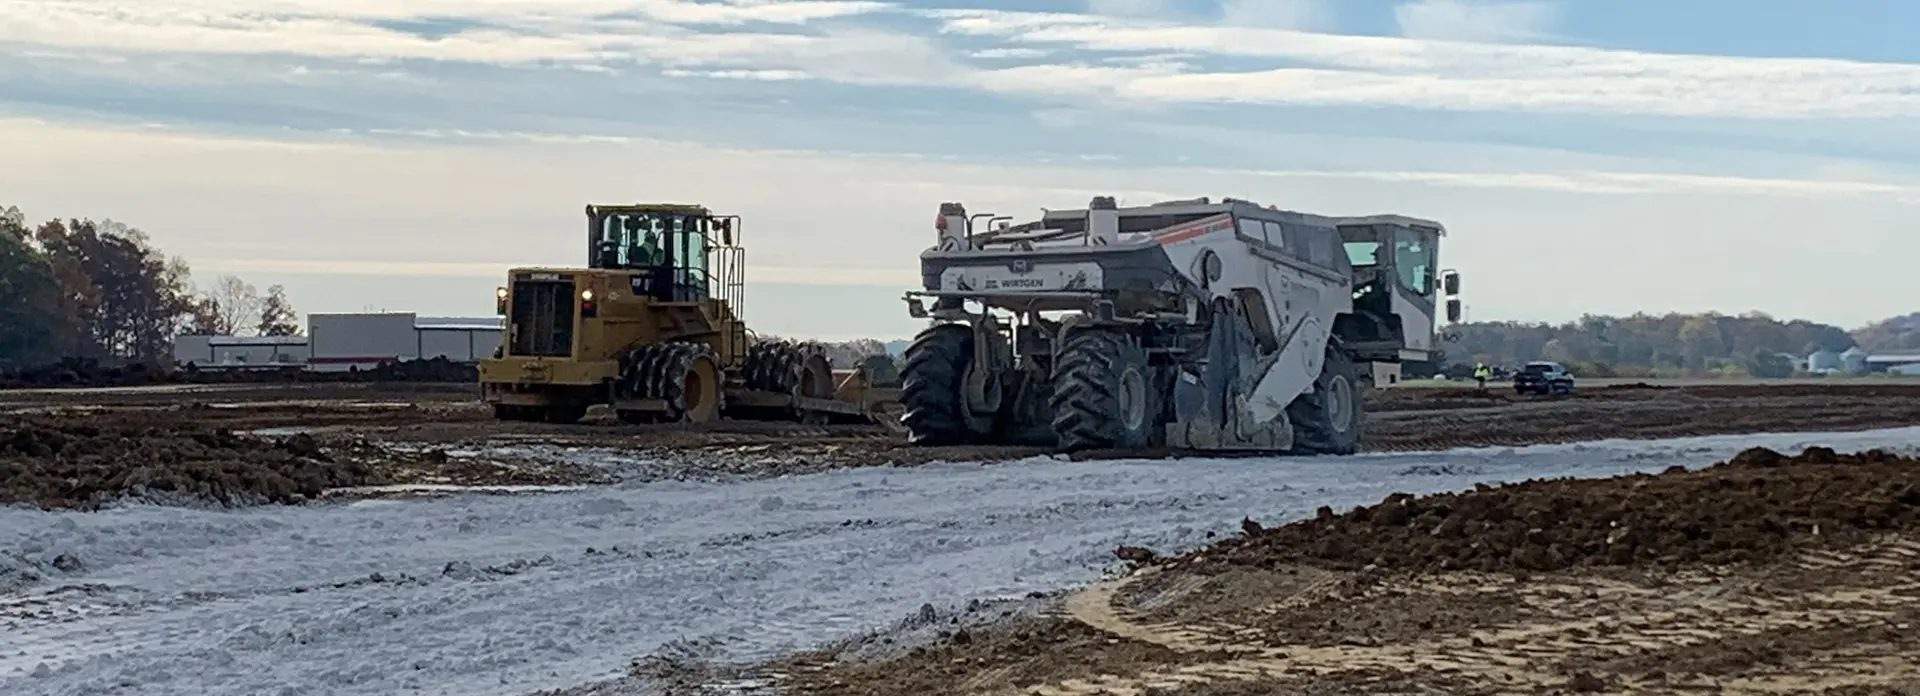 Soil being treated with lime on a worksite